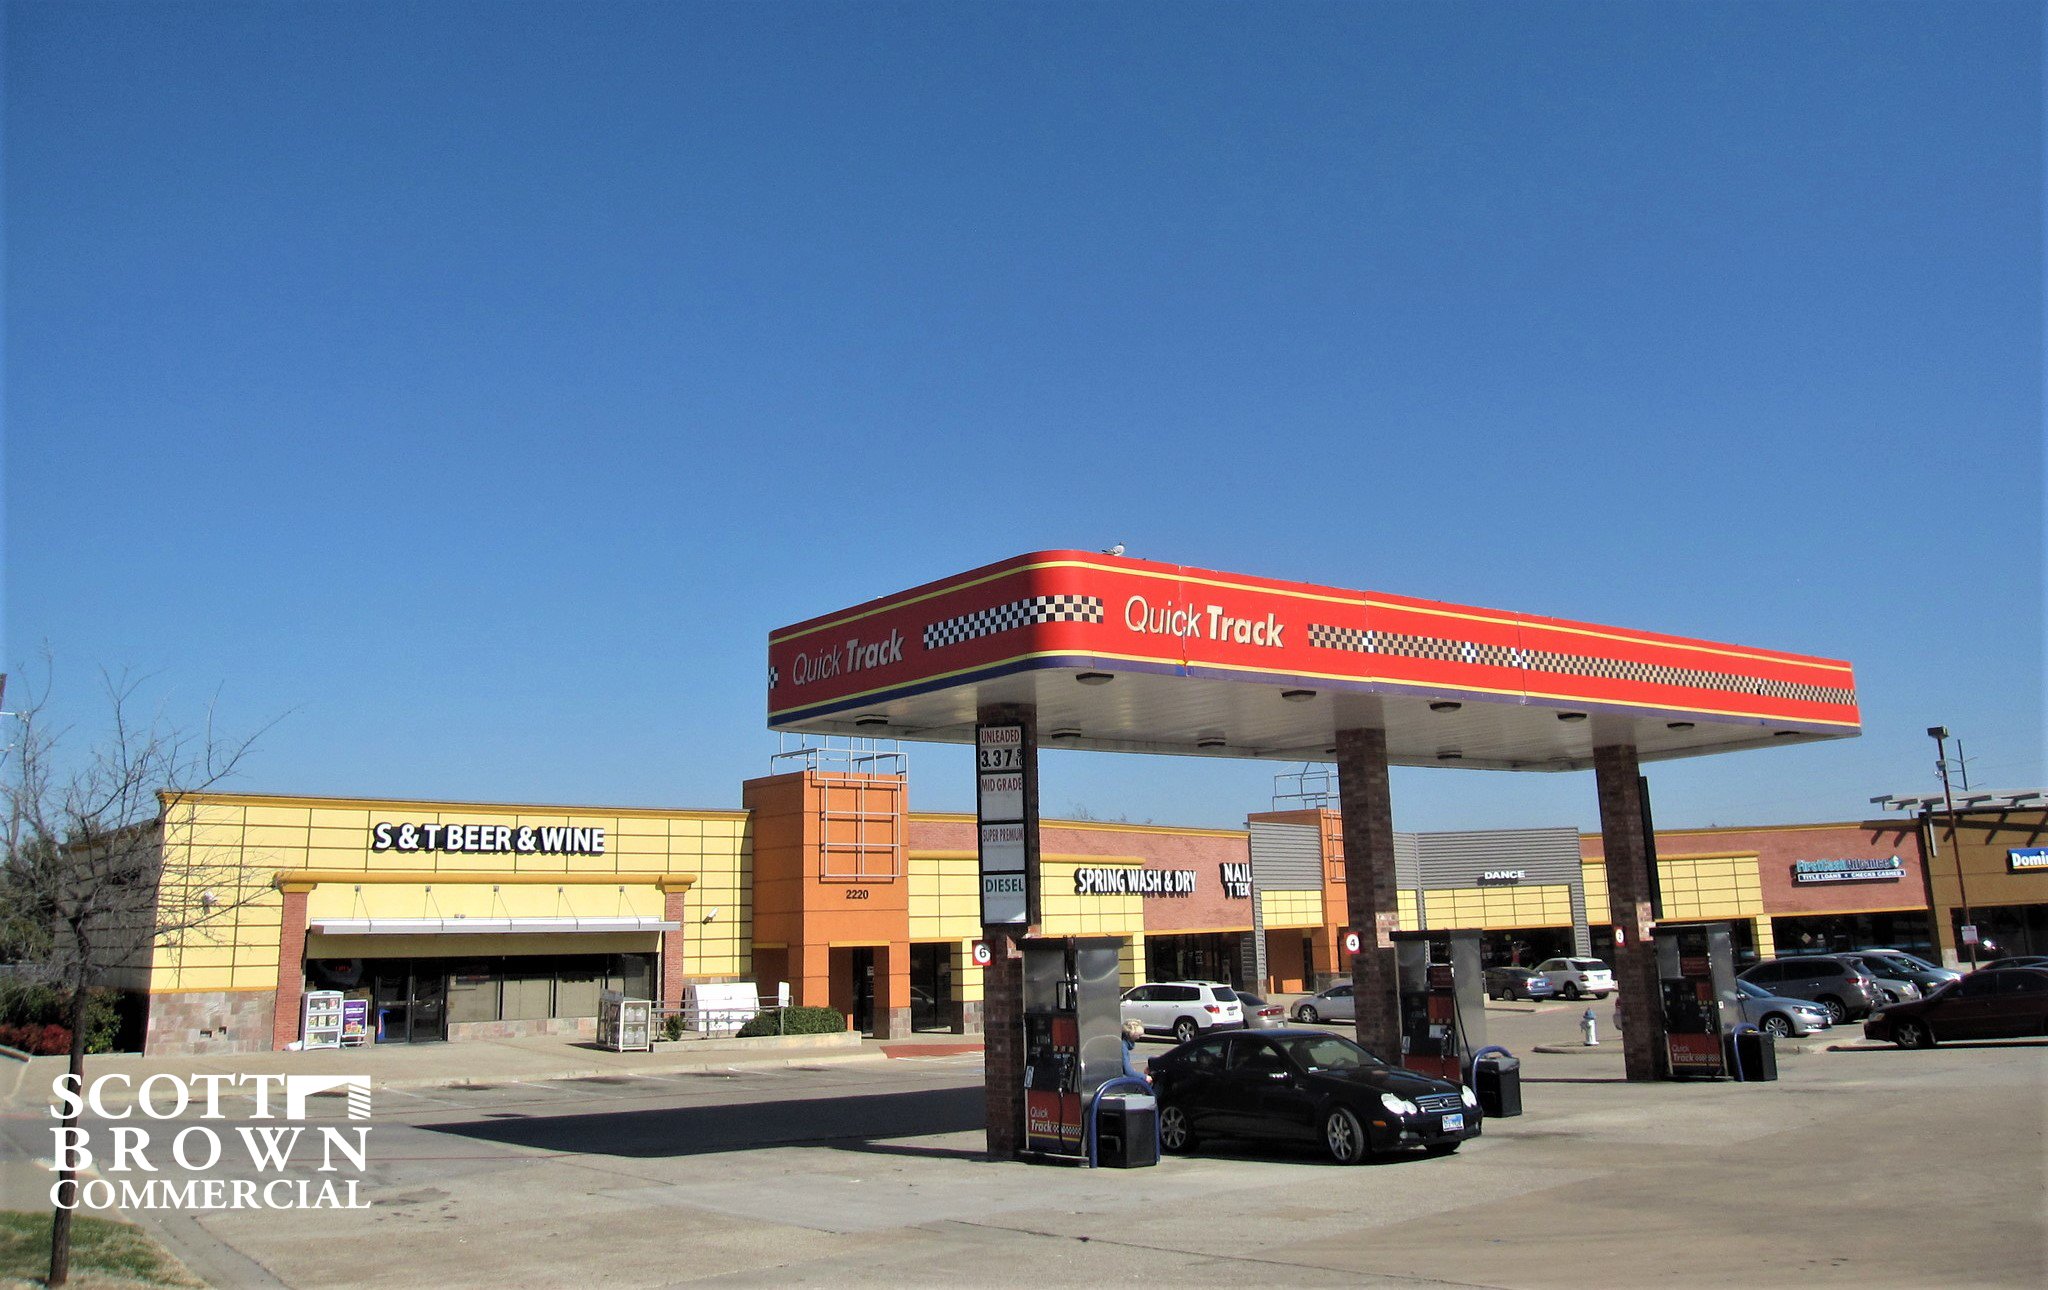  one of the stores at 2220 Marsh Lane has a gas fueling station 